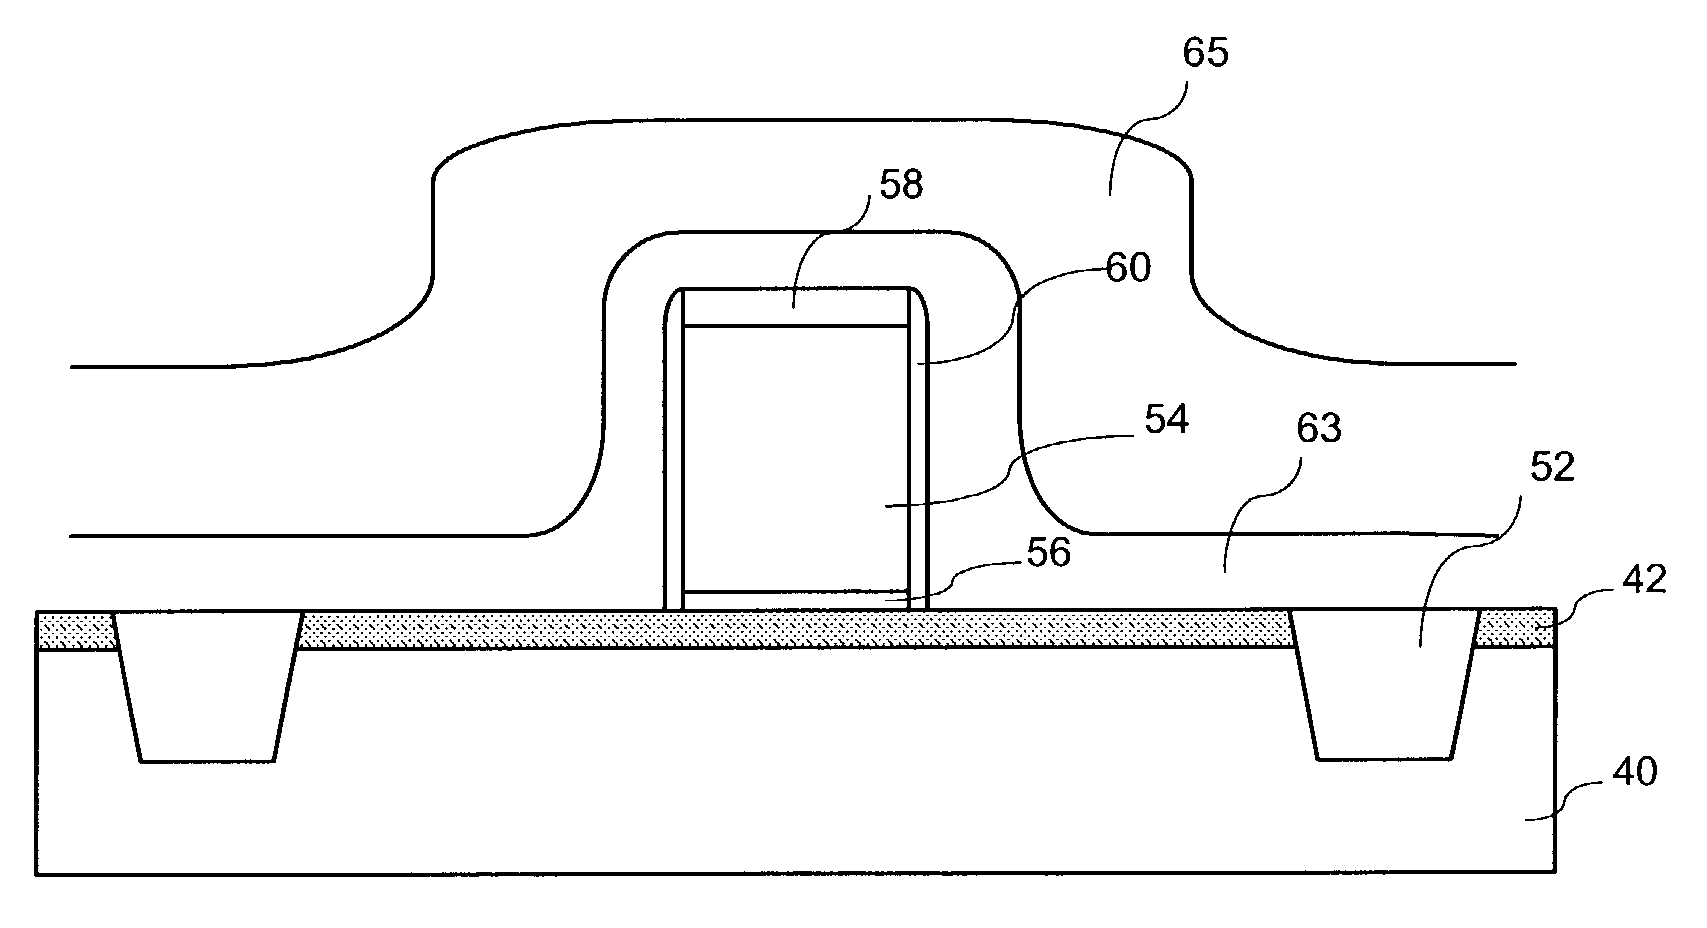 Semiconductor with tensile strained substrate and method of making the same